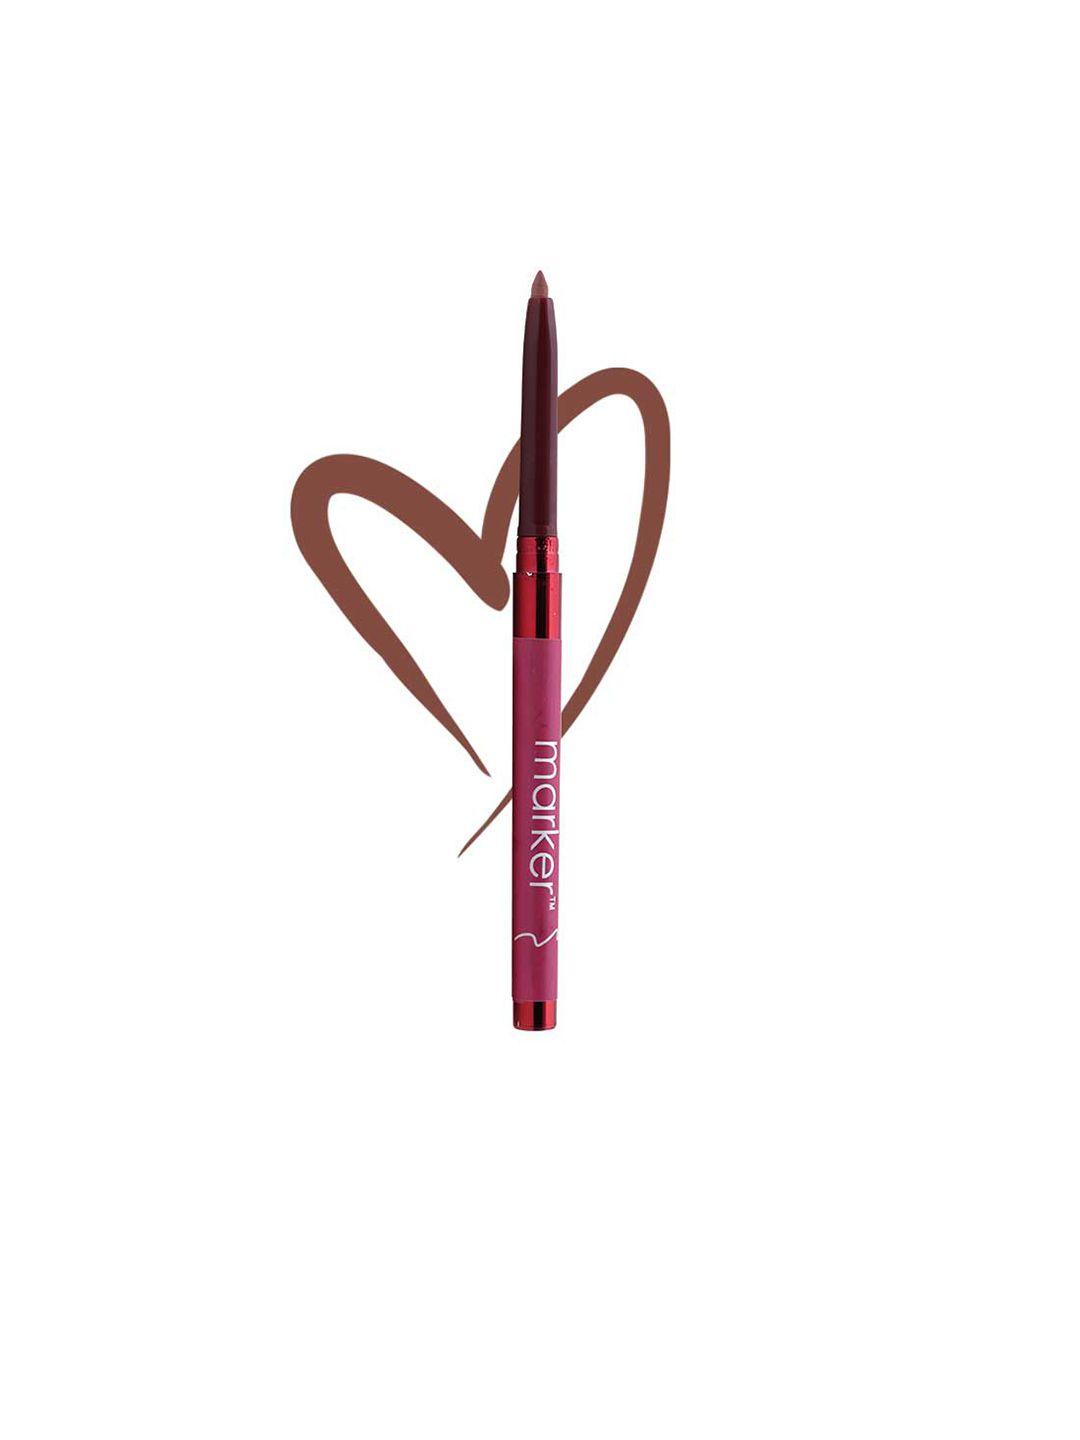 beautyrelay london outline the lips long-lasting lip liner with vitamin e 0.27g - coffee brown